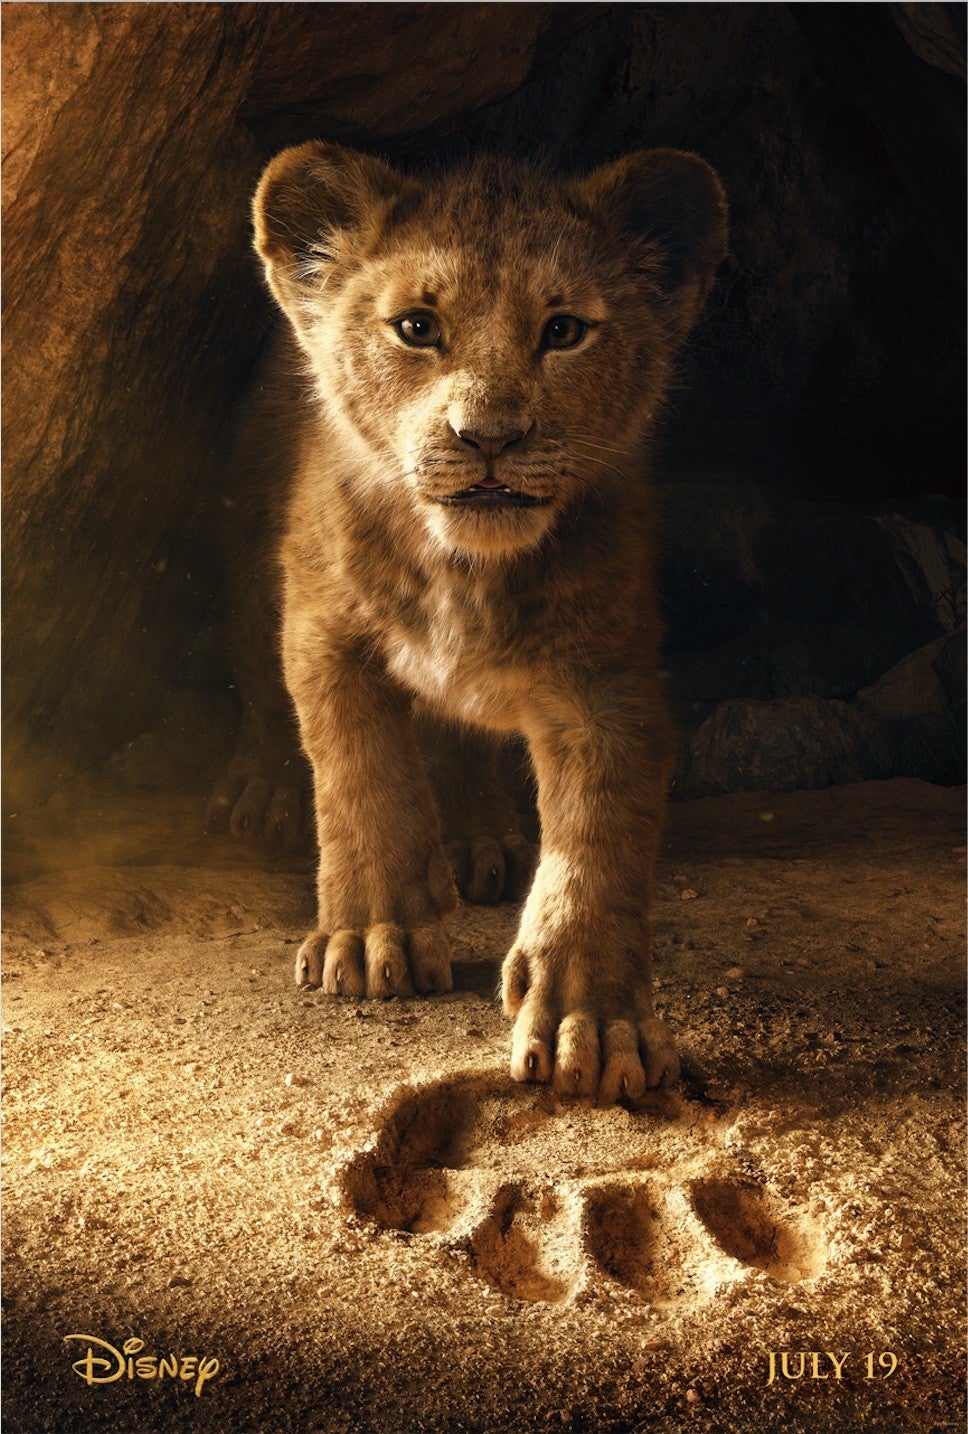 The first poster for 'The Lion King' live-action film.